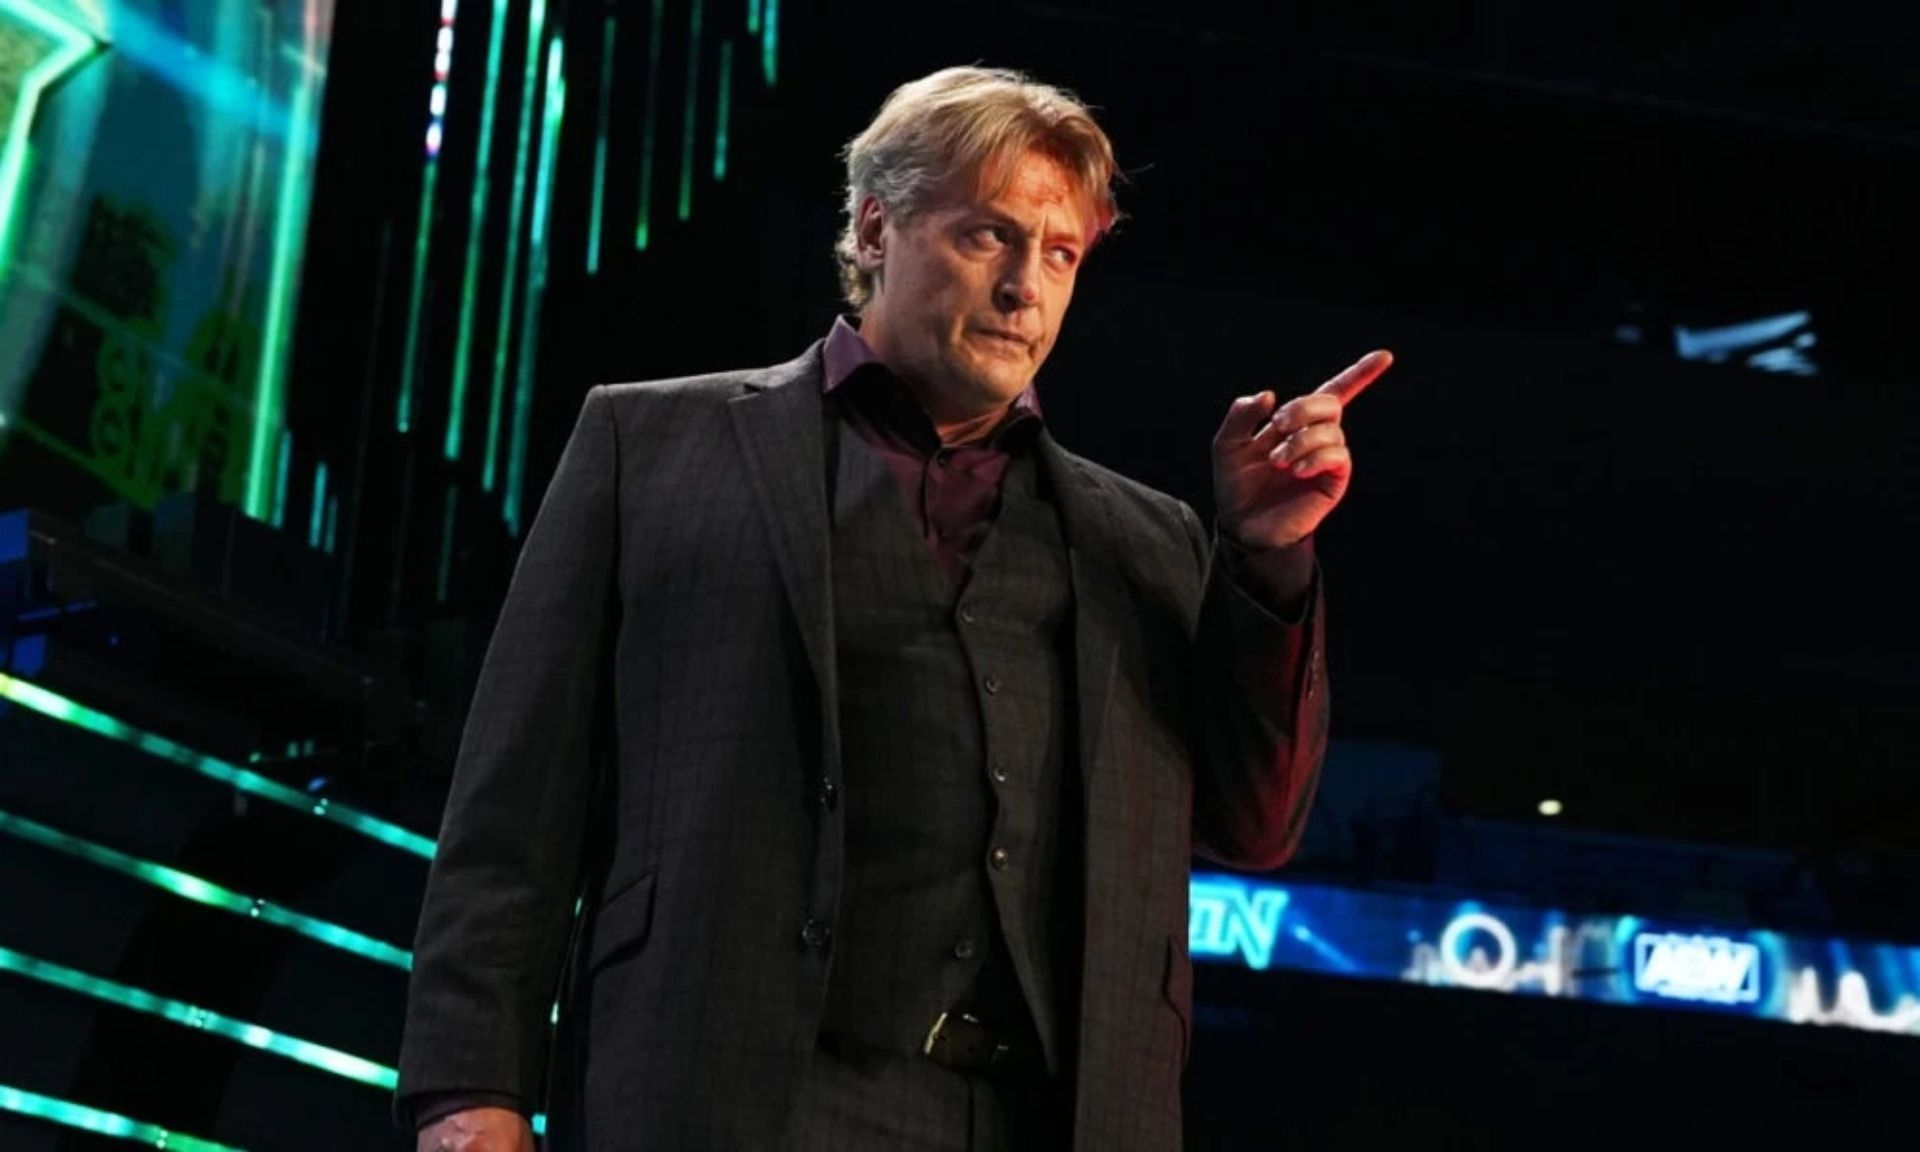 William Regal spent many years as a coach in WWE.